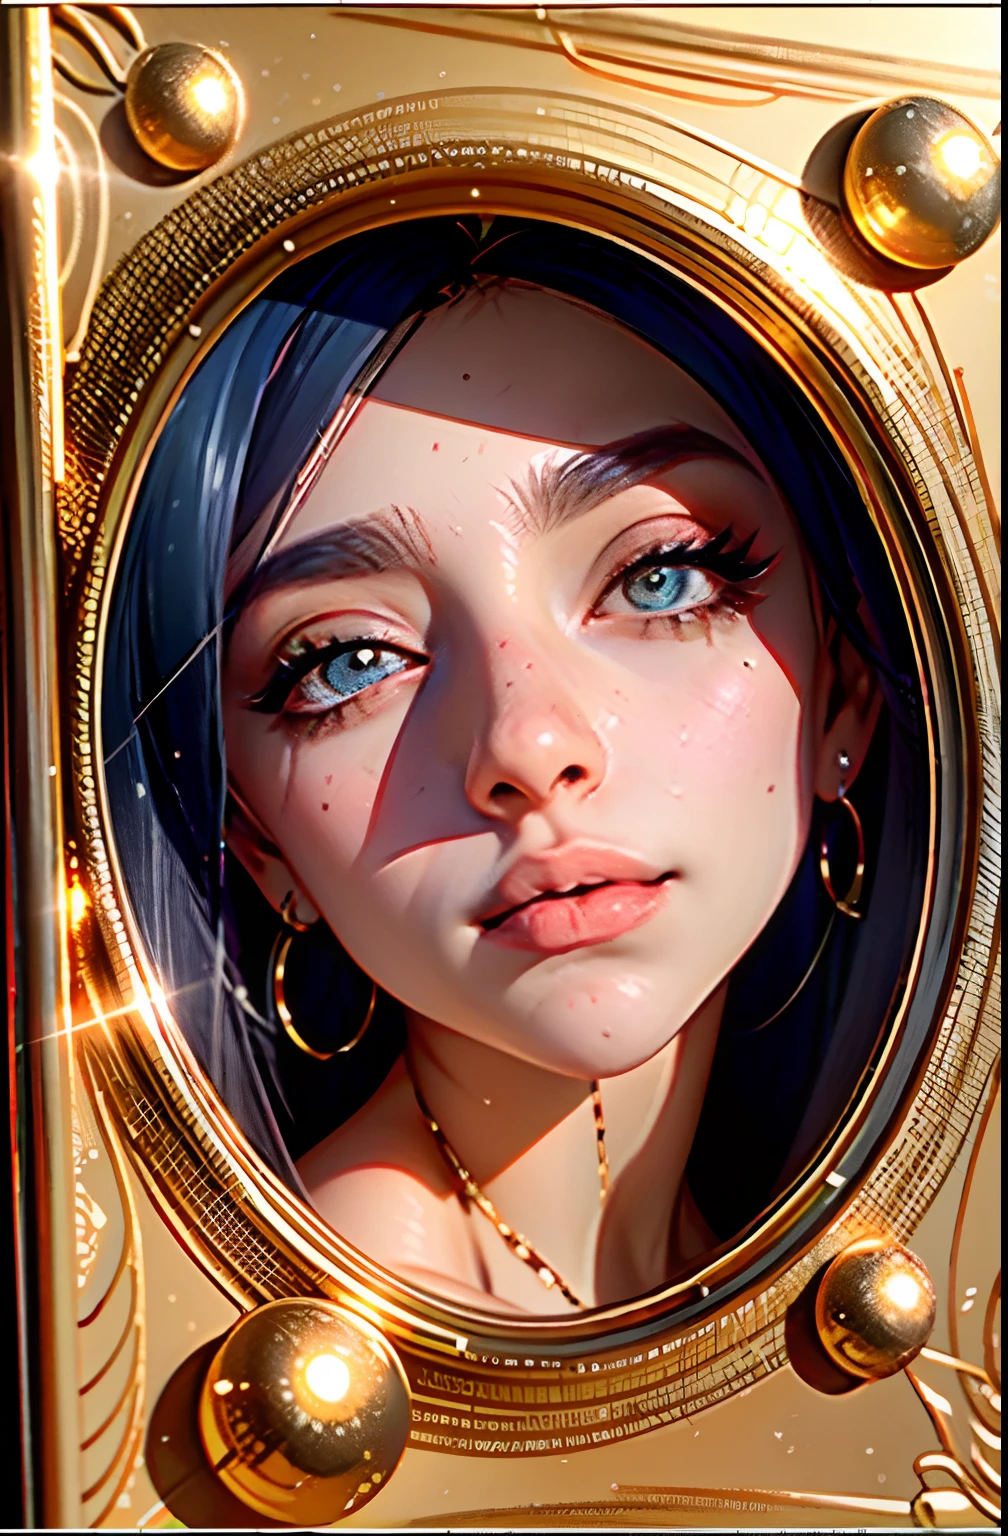 focus on 1 eye ,best quality,4K,super close,master part:1.2,ultra detali,Realistic:1.37 portrait, detailedeyes,Reflection of the galaxy,shining stars,Hypnotic Colors,cosmic atmosphere,surrealistic,ethereal beauty,detailed lashes,Shimmering teardrops,fancy,night sky,Tema Celestial,dreamlike,magie,artist's interpretation,Fluttering,bright universe,Single Eye Close-up,1 eye only,Meticulous brushstrokes,unearthly,Deep space exploration,Stellar agglomerates,twinkling lights,serene expression,cosmic energy,Star Day,unlimited possibilities,Transcendent experience.perfects eyes,8K raw photo